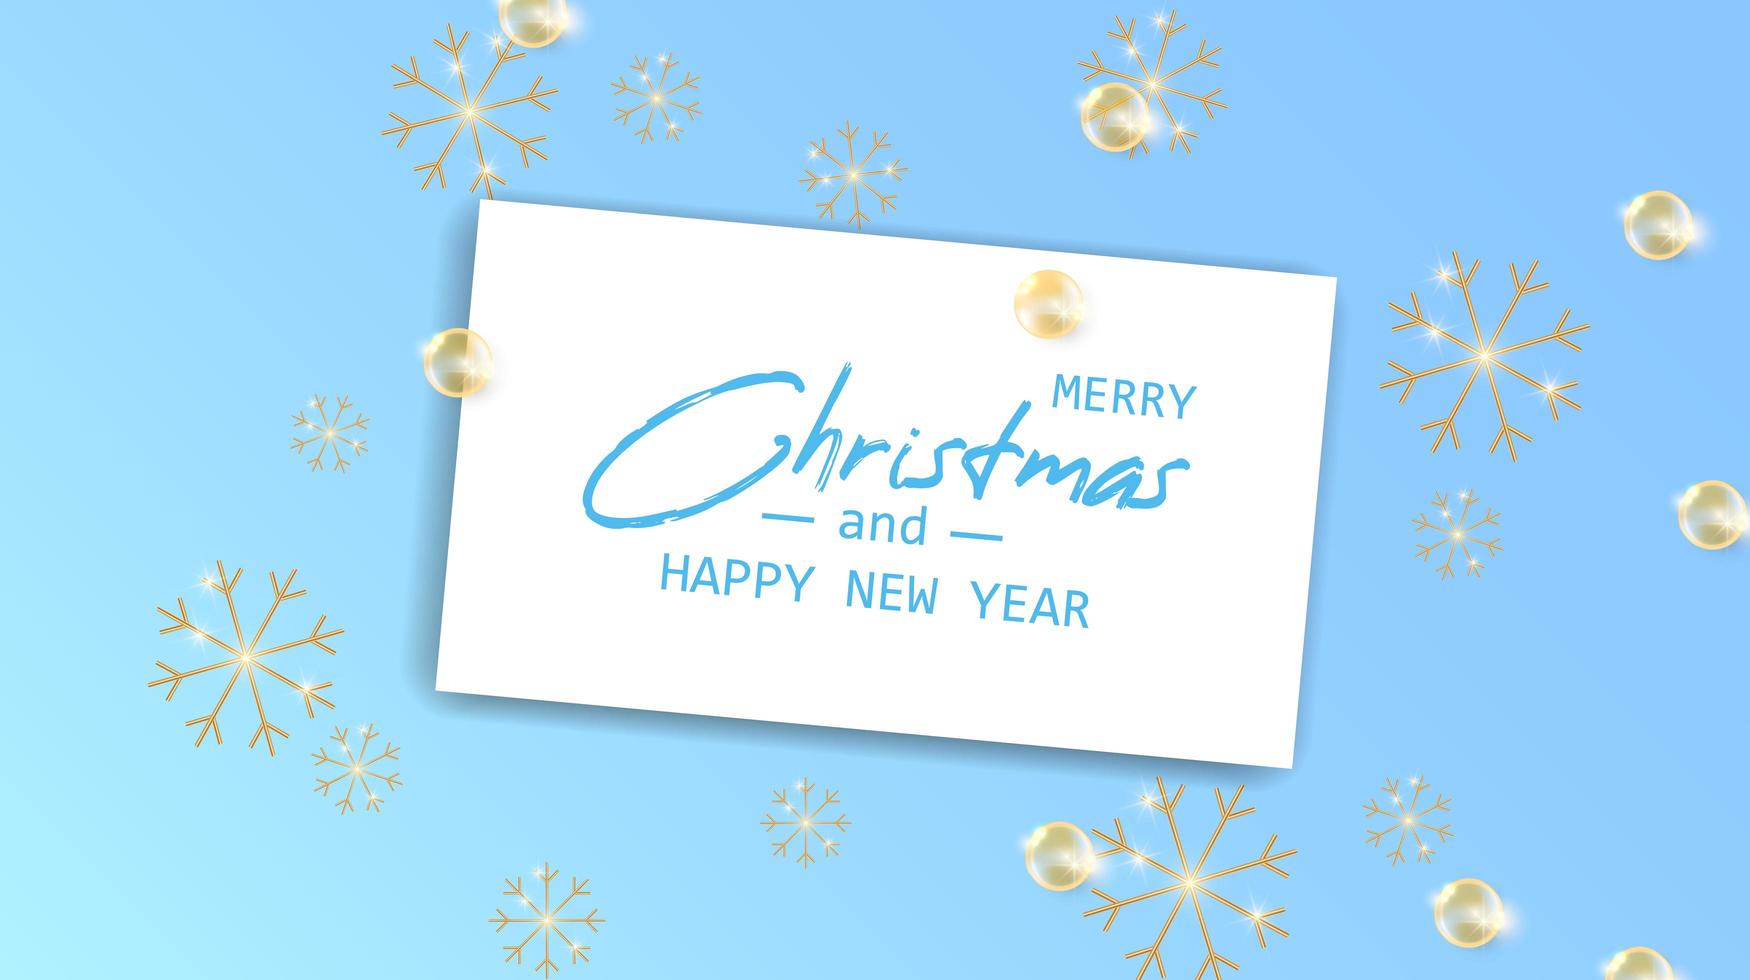 Marry Christmas and Happy New Year card vector